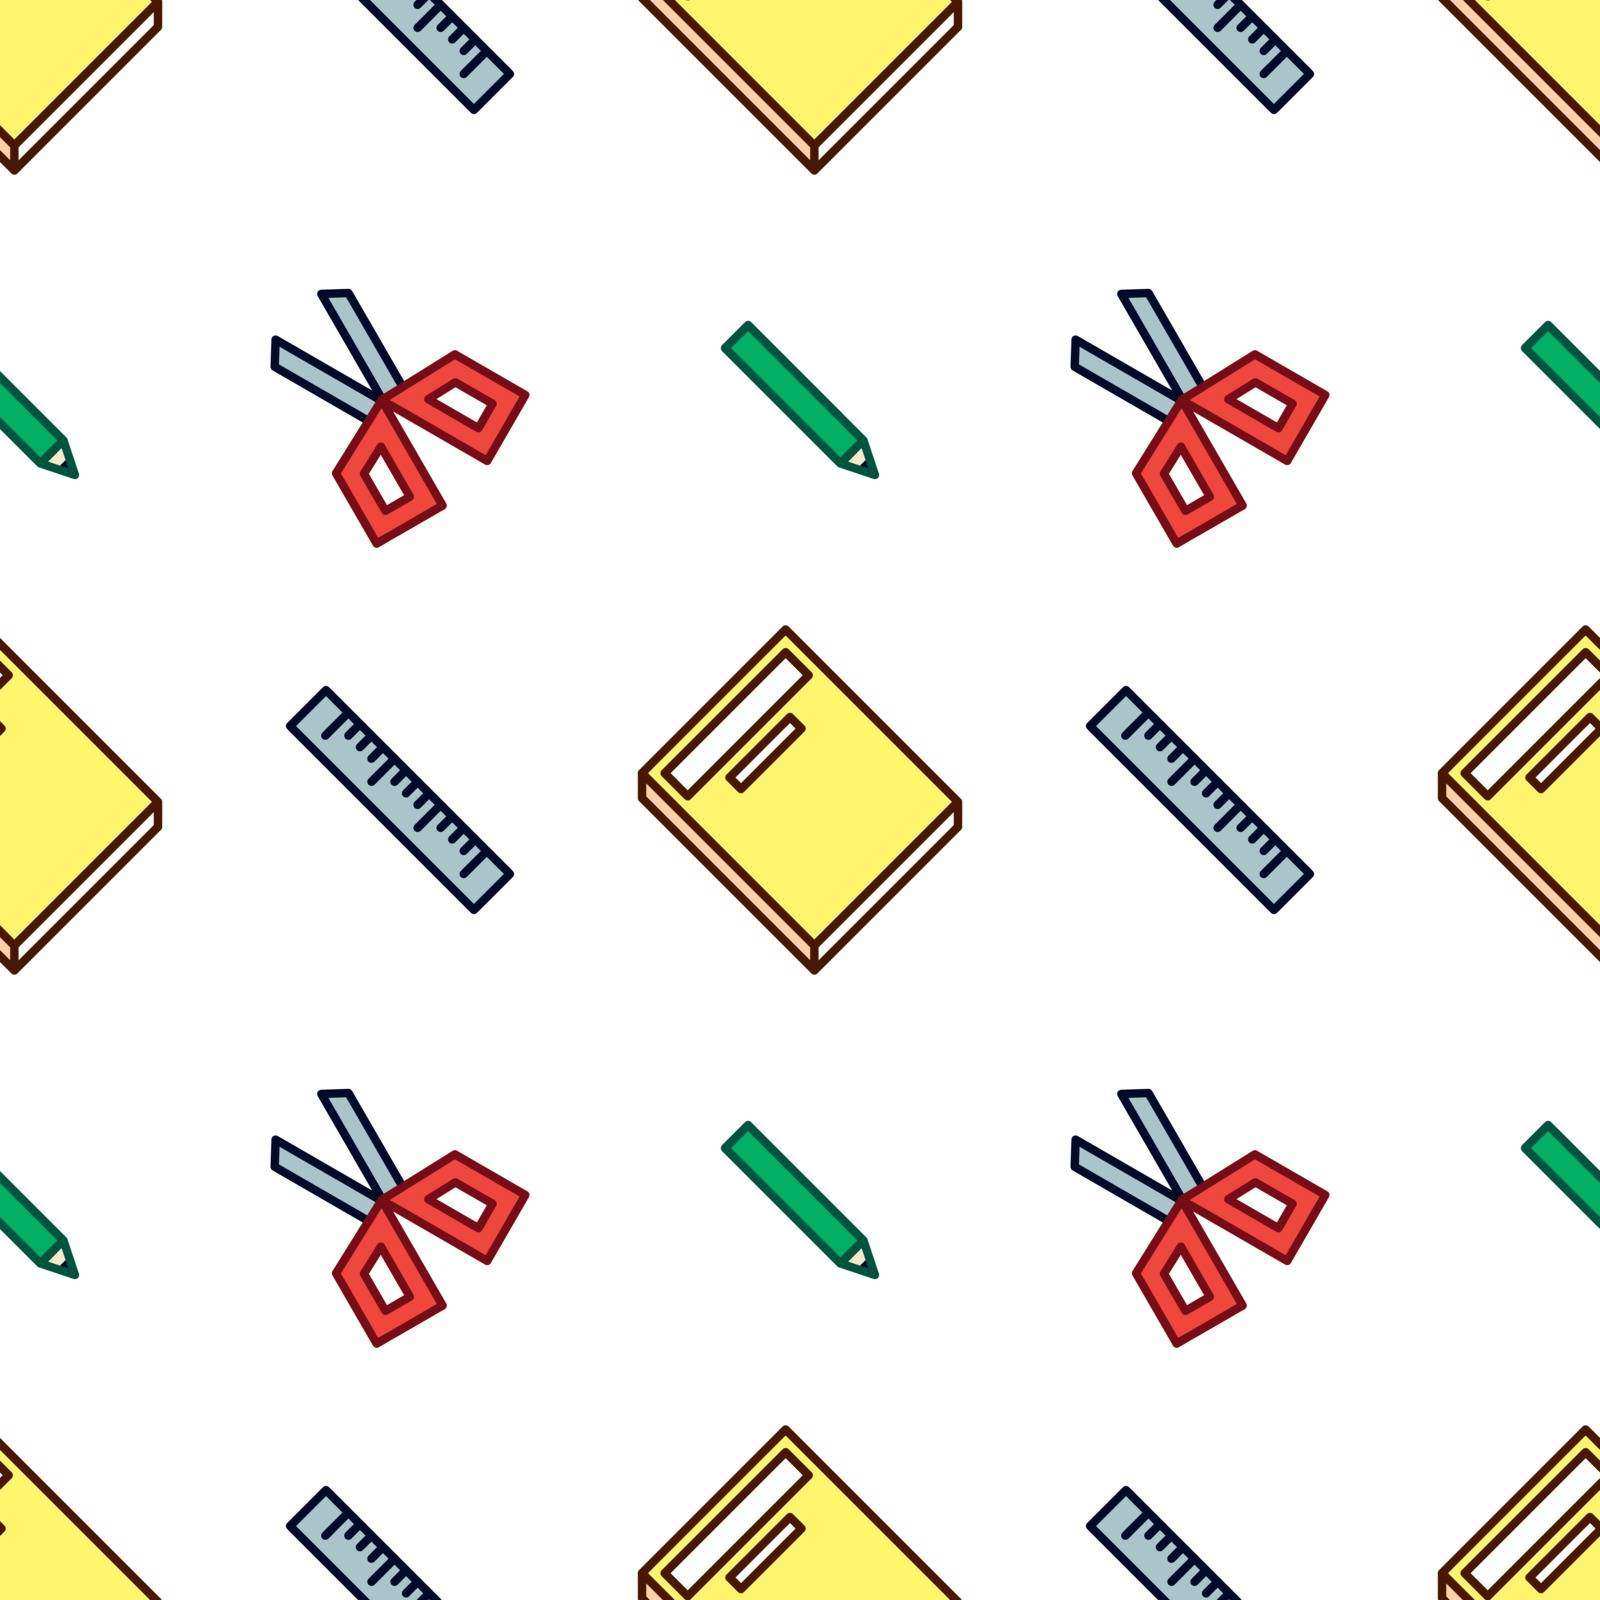 Crisp stationery pattern for your covers, gift wraps, and more.